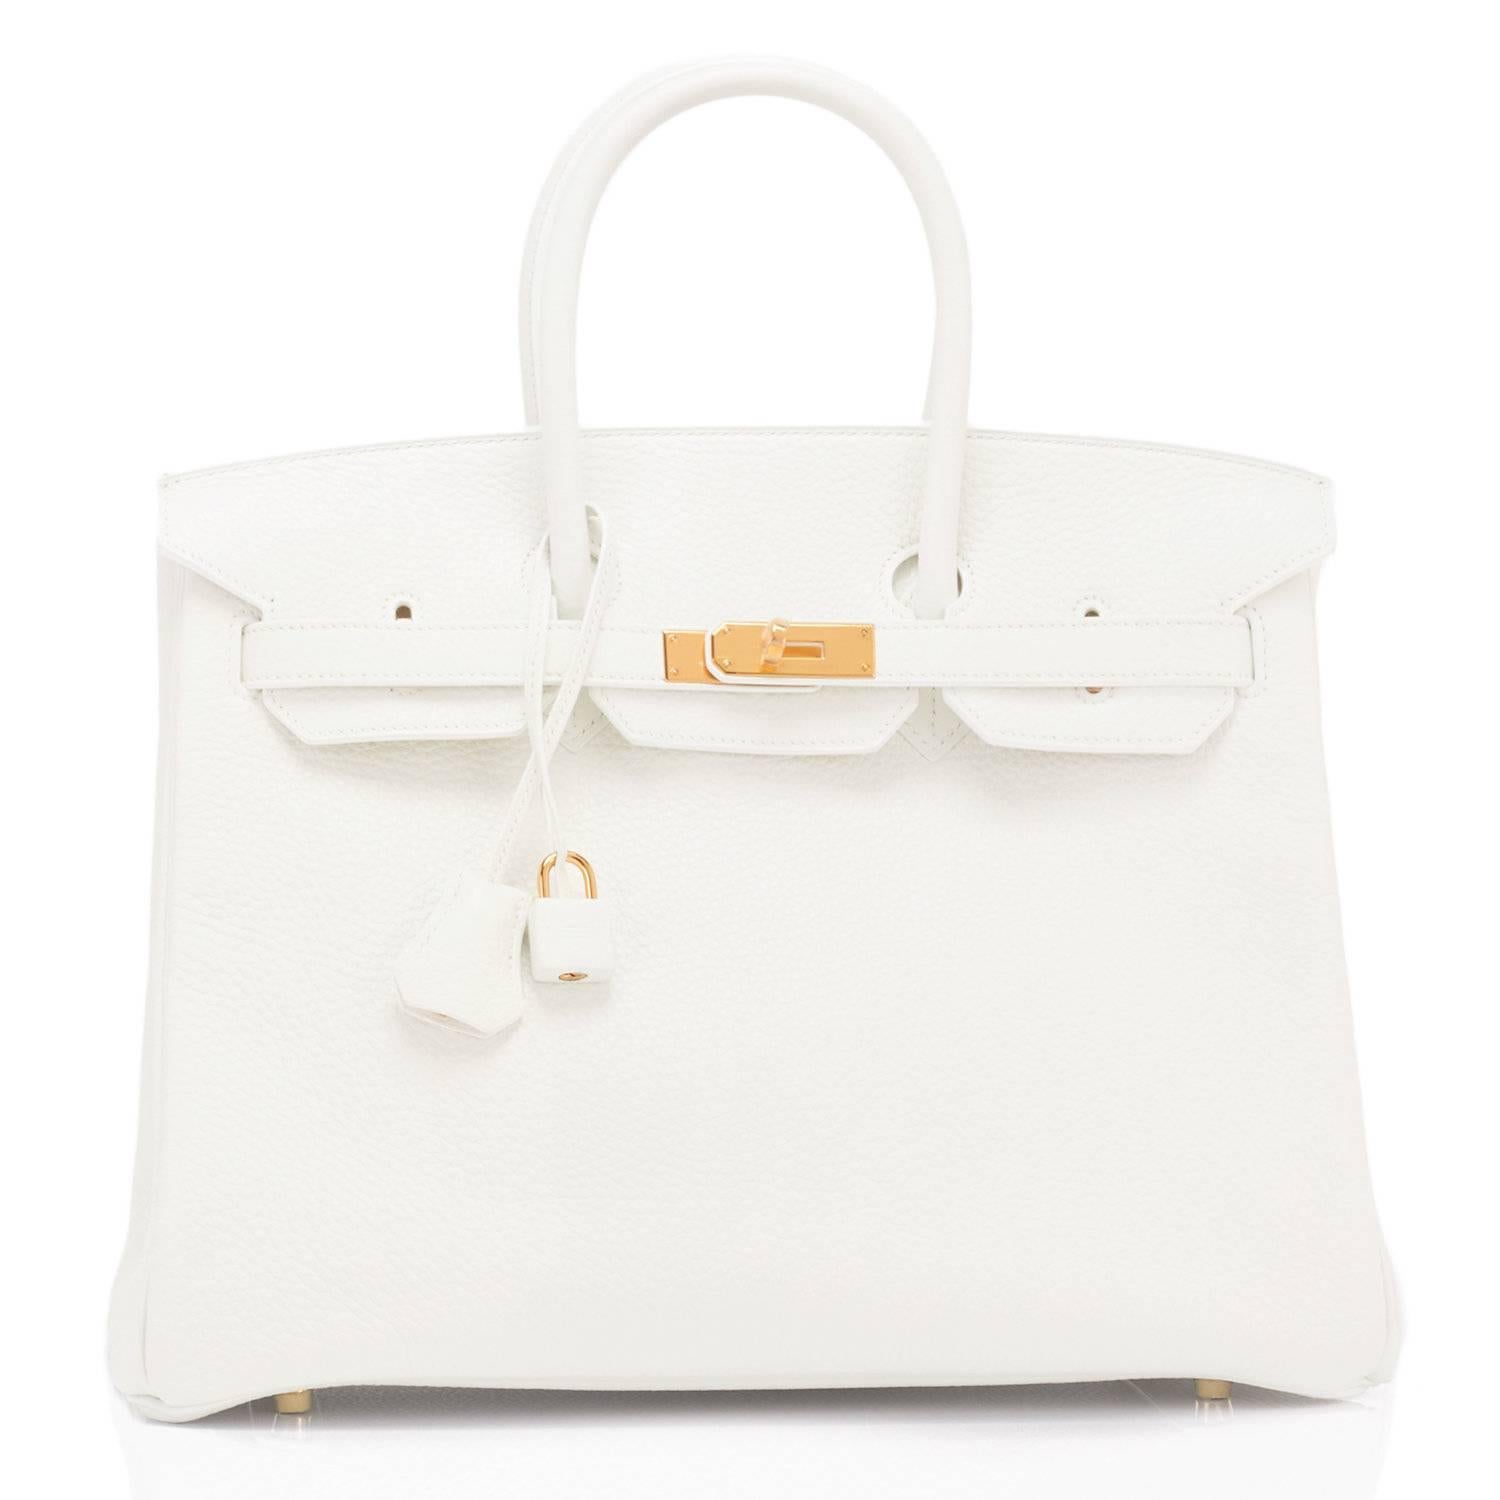 Hermes White 35cm Clemence Birkin Gold Hardware Rare X Stamp
Rare X Stamp Production. Brand New in Box. Store fresh. Pristine condition (with plastic on hardware). 
Perfect gift! Comes full set with keys, lock, clochette, a sleeper for the bag, rain